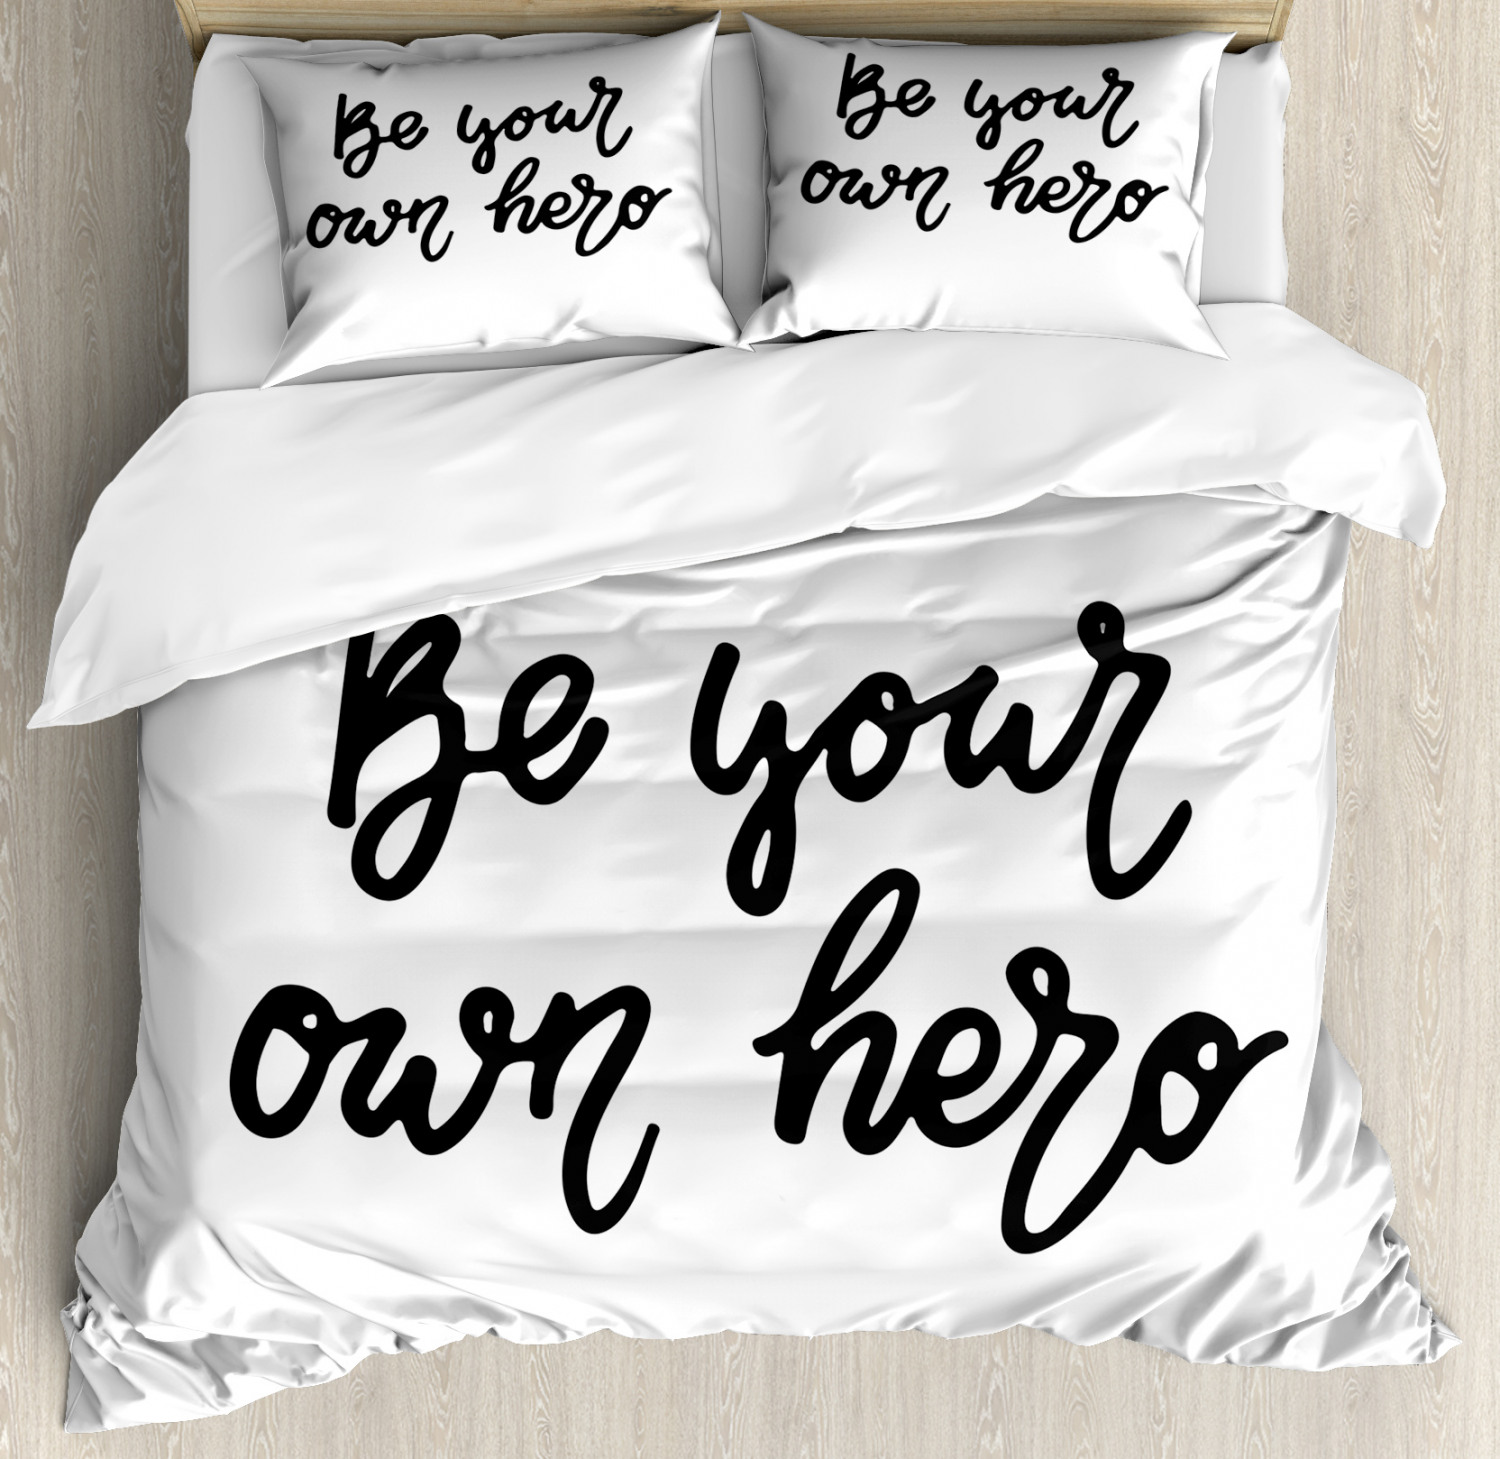 Girl Slogan Duvet Cover Set Queen Size, Be Your Own Hero Inspirational and Strengthening Self Righteous, 3 Piece Bedding Set with 2 Pillow Shams, Charcoal Grey and White, by Ambesonne - image 1 of 3